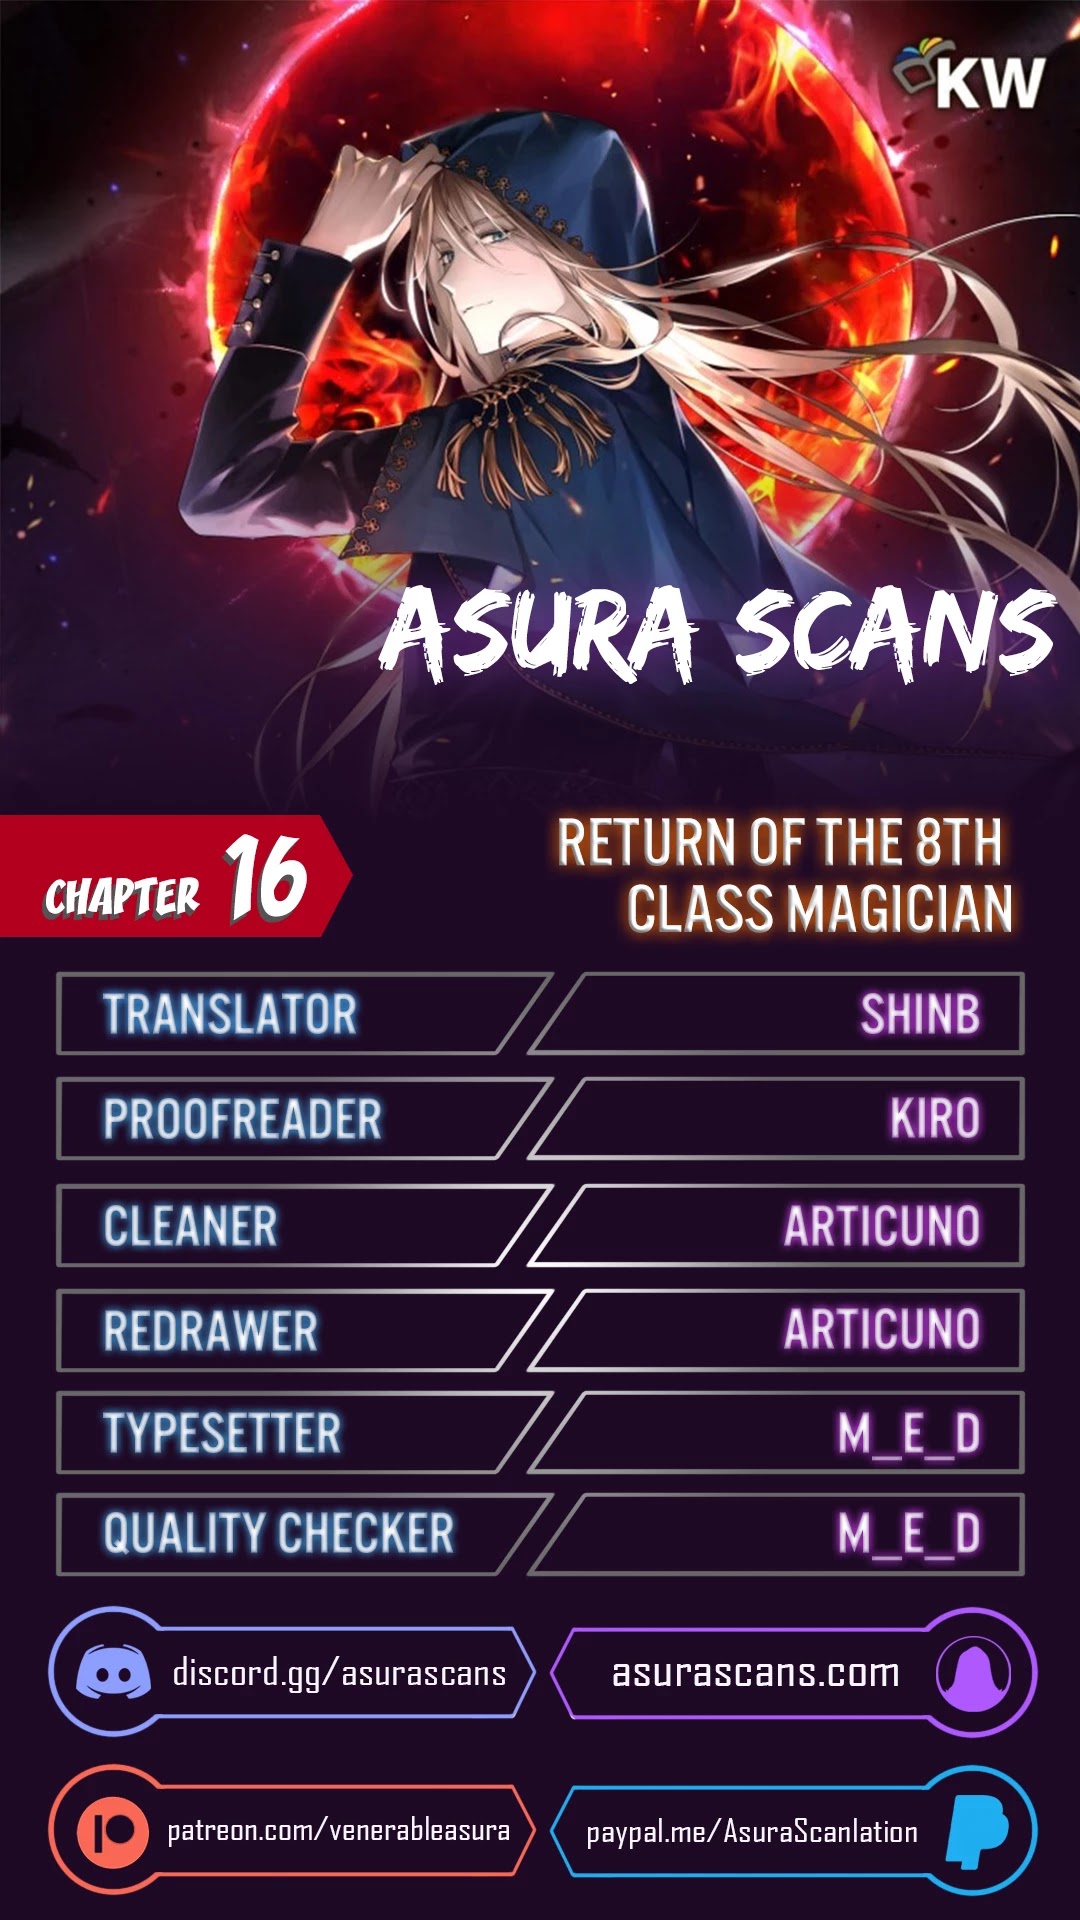 Return of the 8th class Magician chapter 16